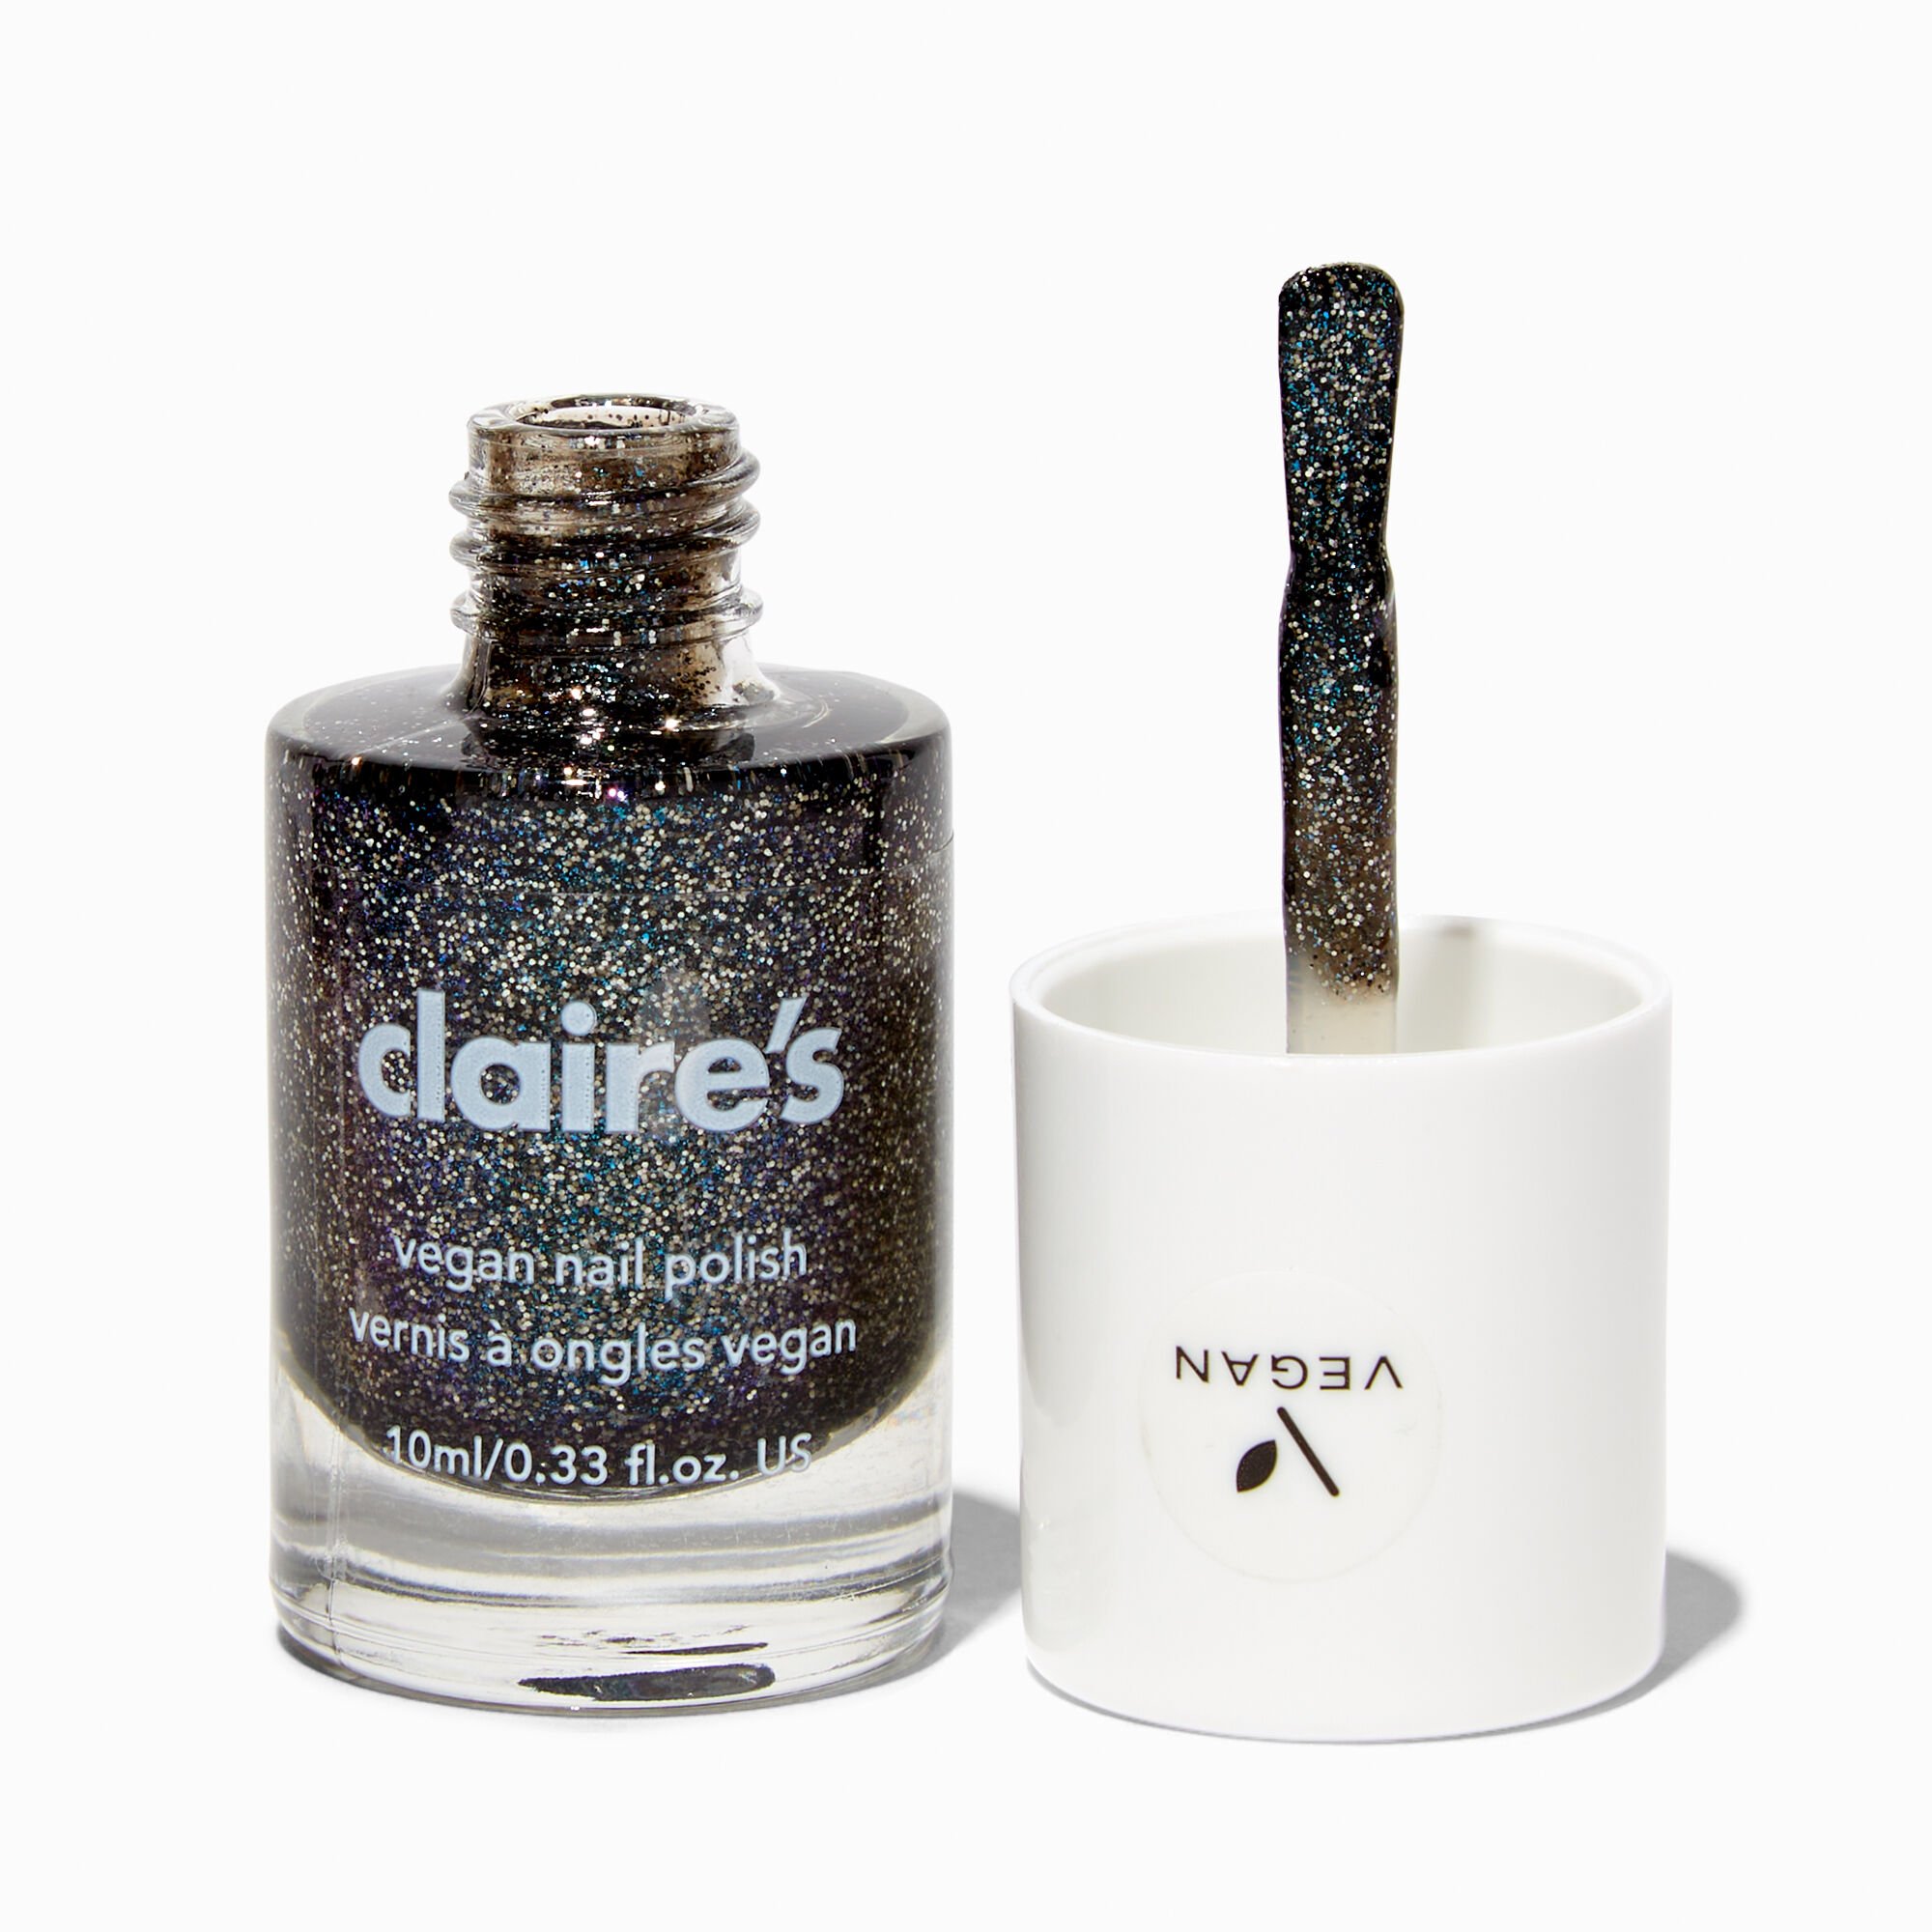 View Claires Vegan Glitter Nail Polish Late Night information